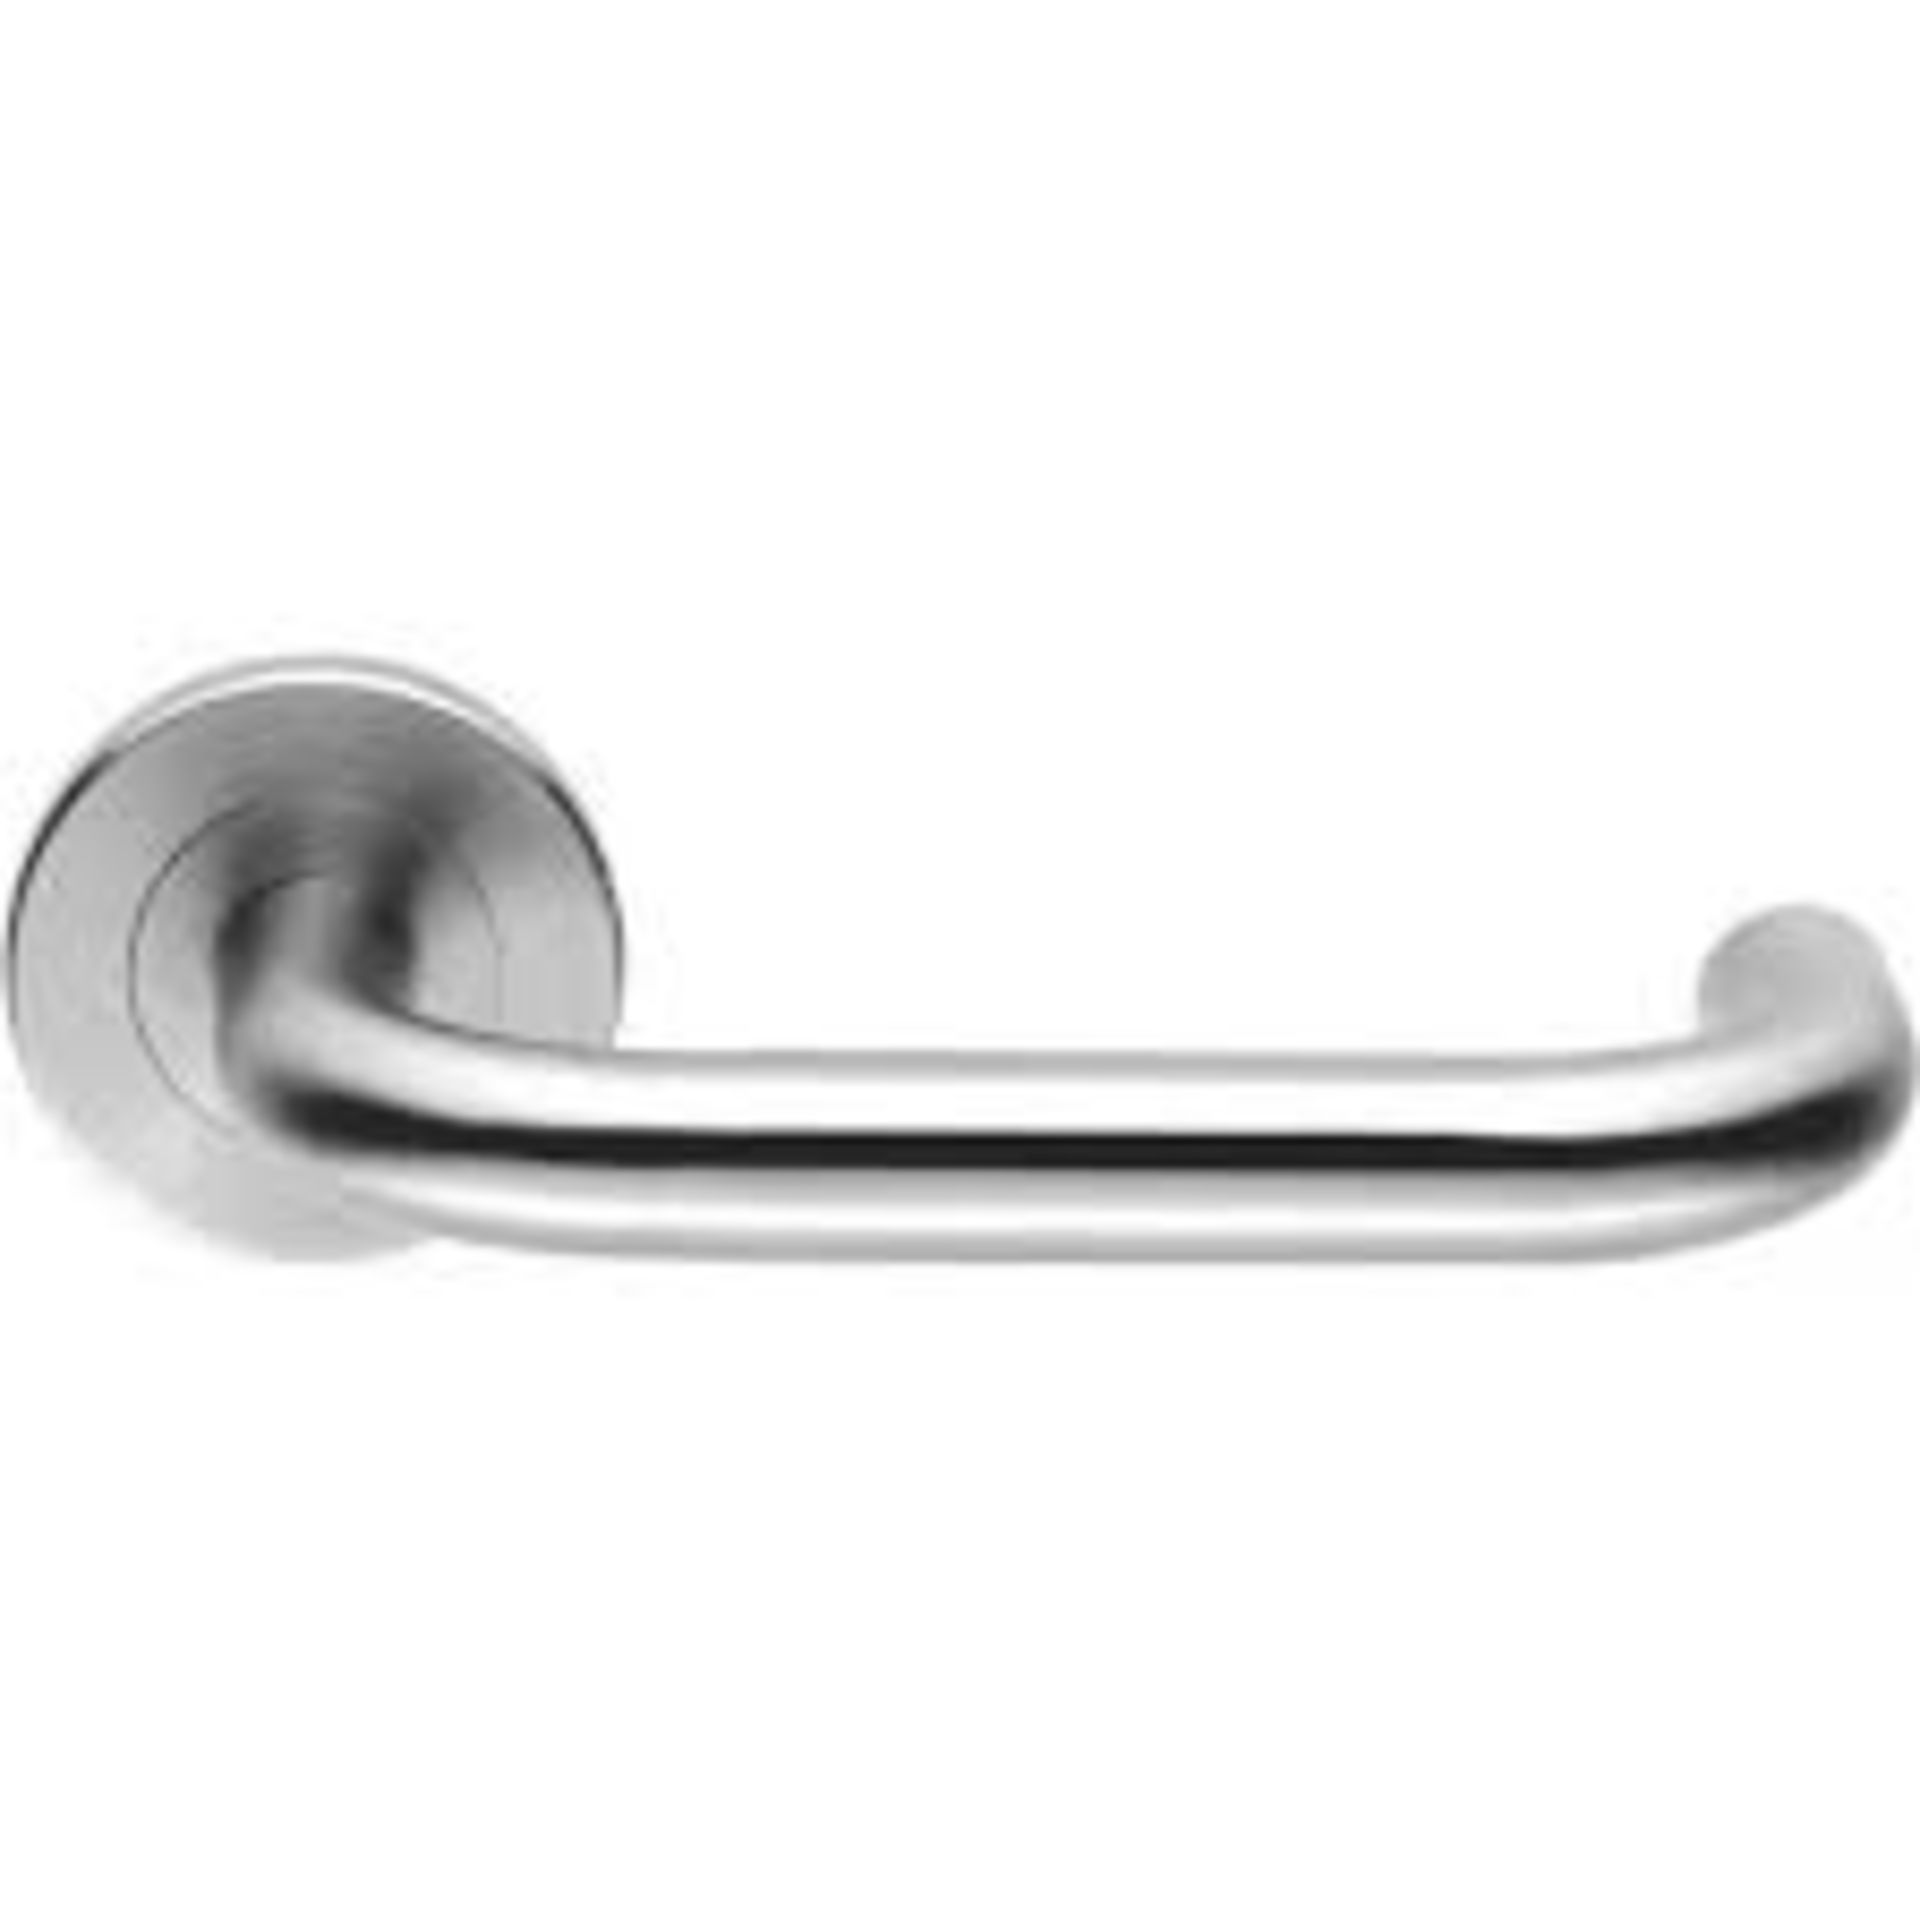 8 x Selection Of Different Handles (Pairs) From Eurospec, Frelan and Jedo - Brand New Stock - - Image 3 of 5